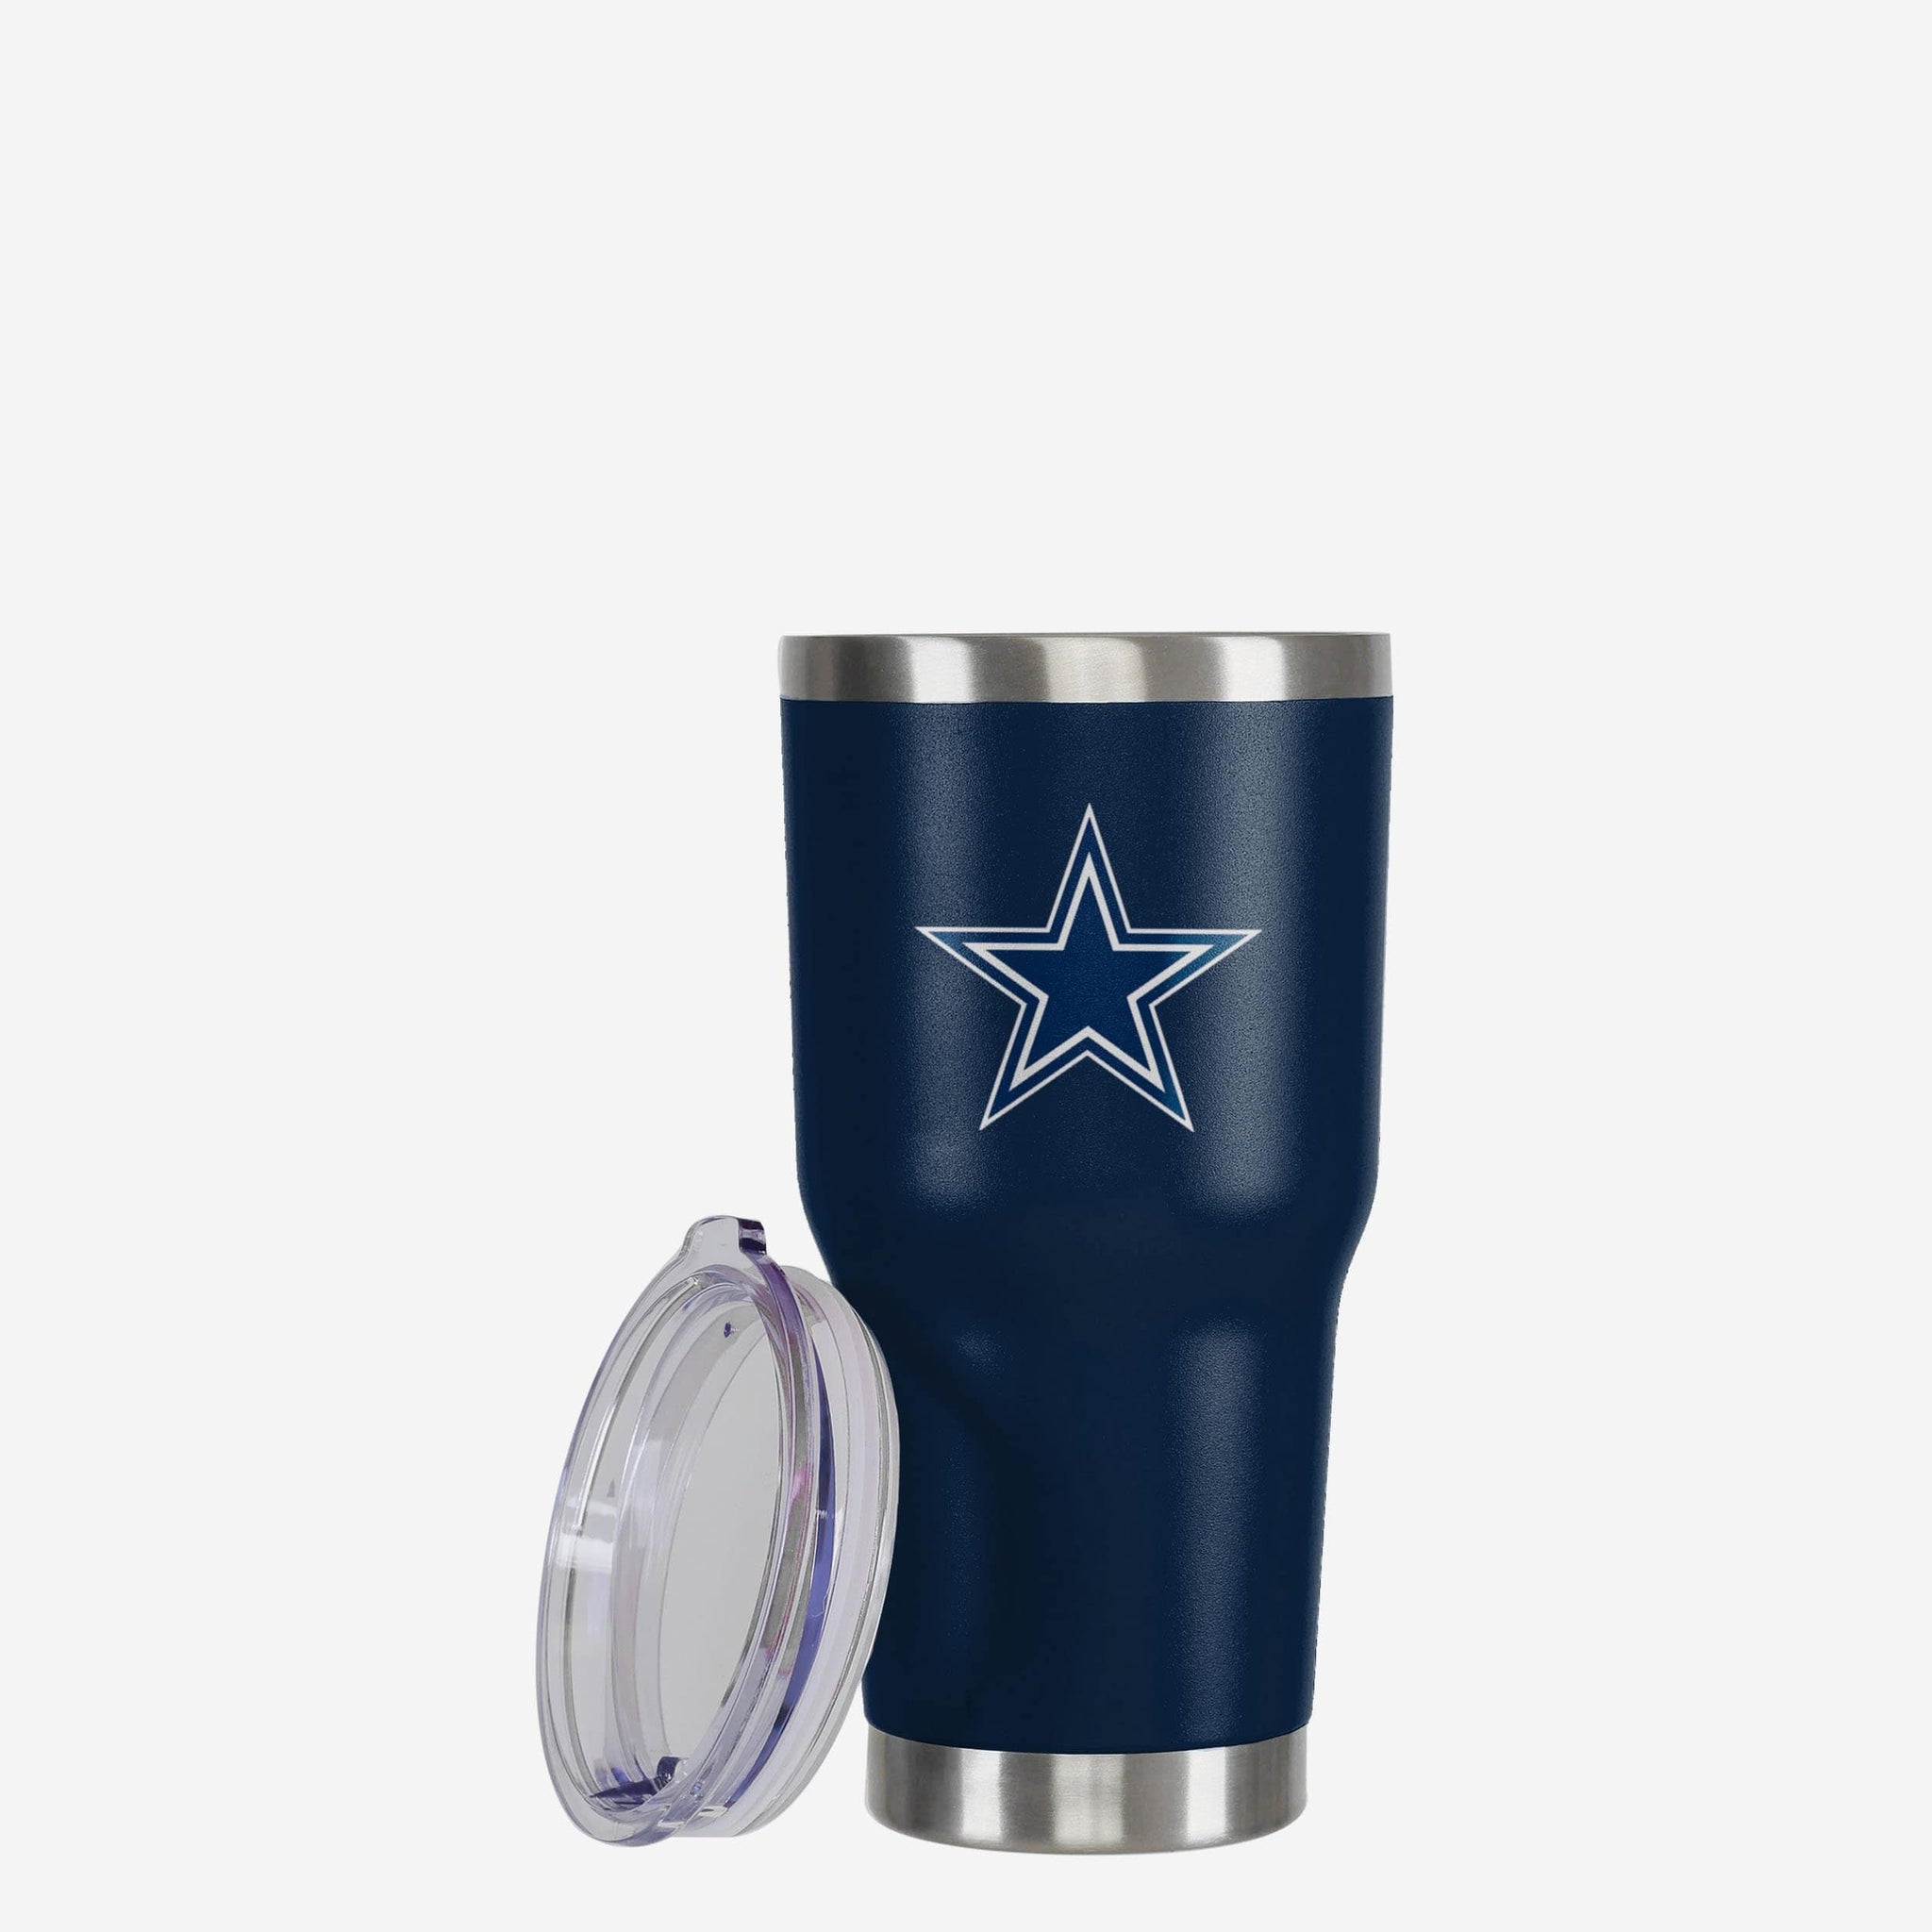 Logo Brands Dallas Cowboys 30-fl oz Stainless Steel White Cup Set of: 1 at